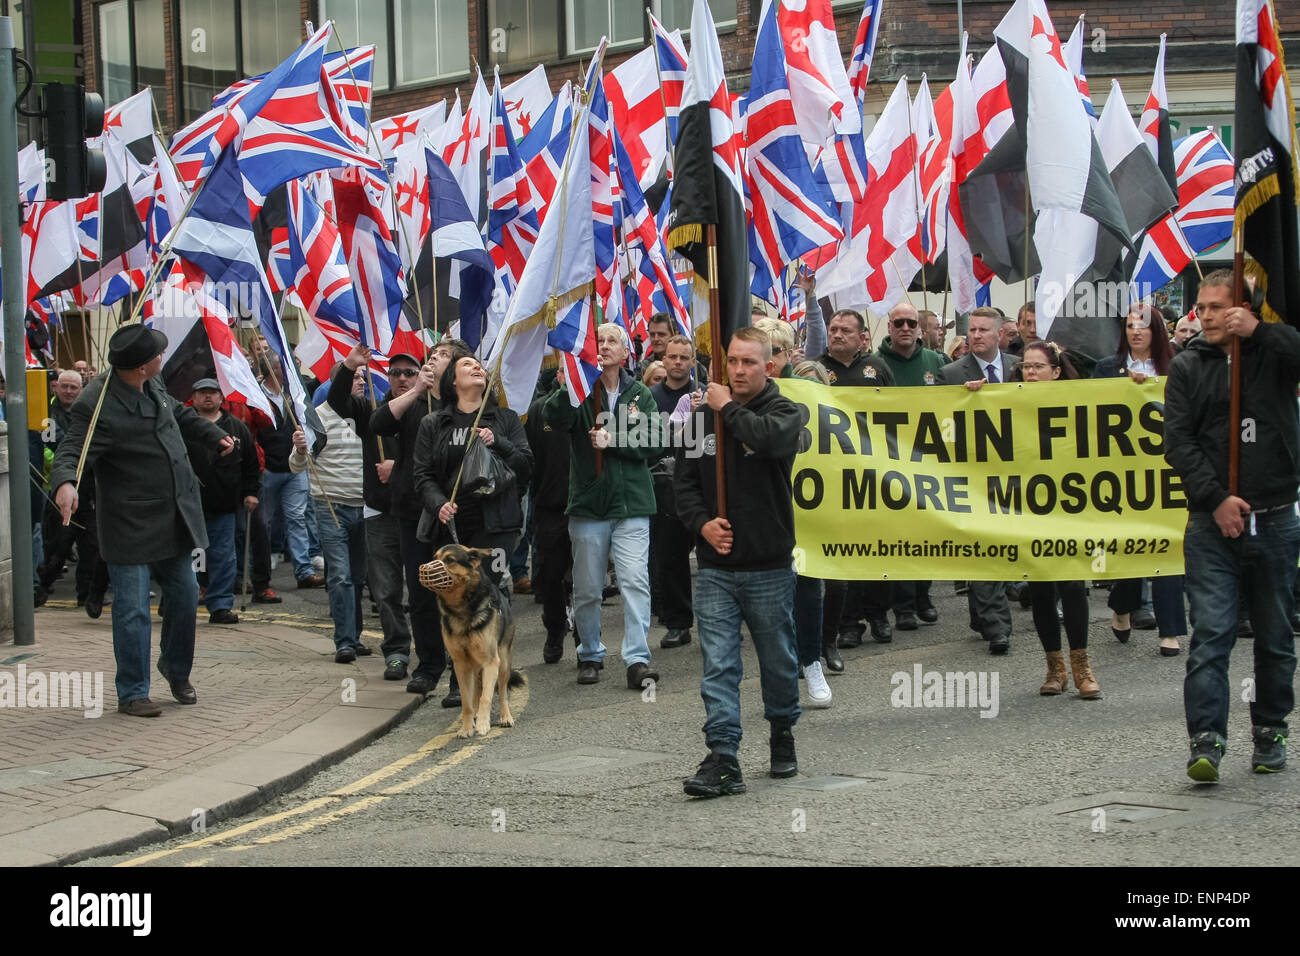 Britain First - a far right nationalist political party - demonstrate in Dudley, West Midlands UK Stock Photo